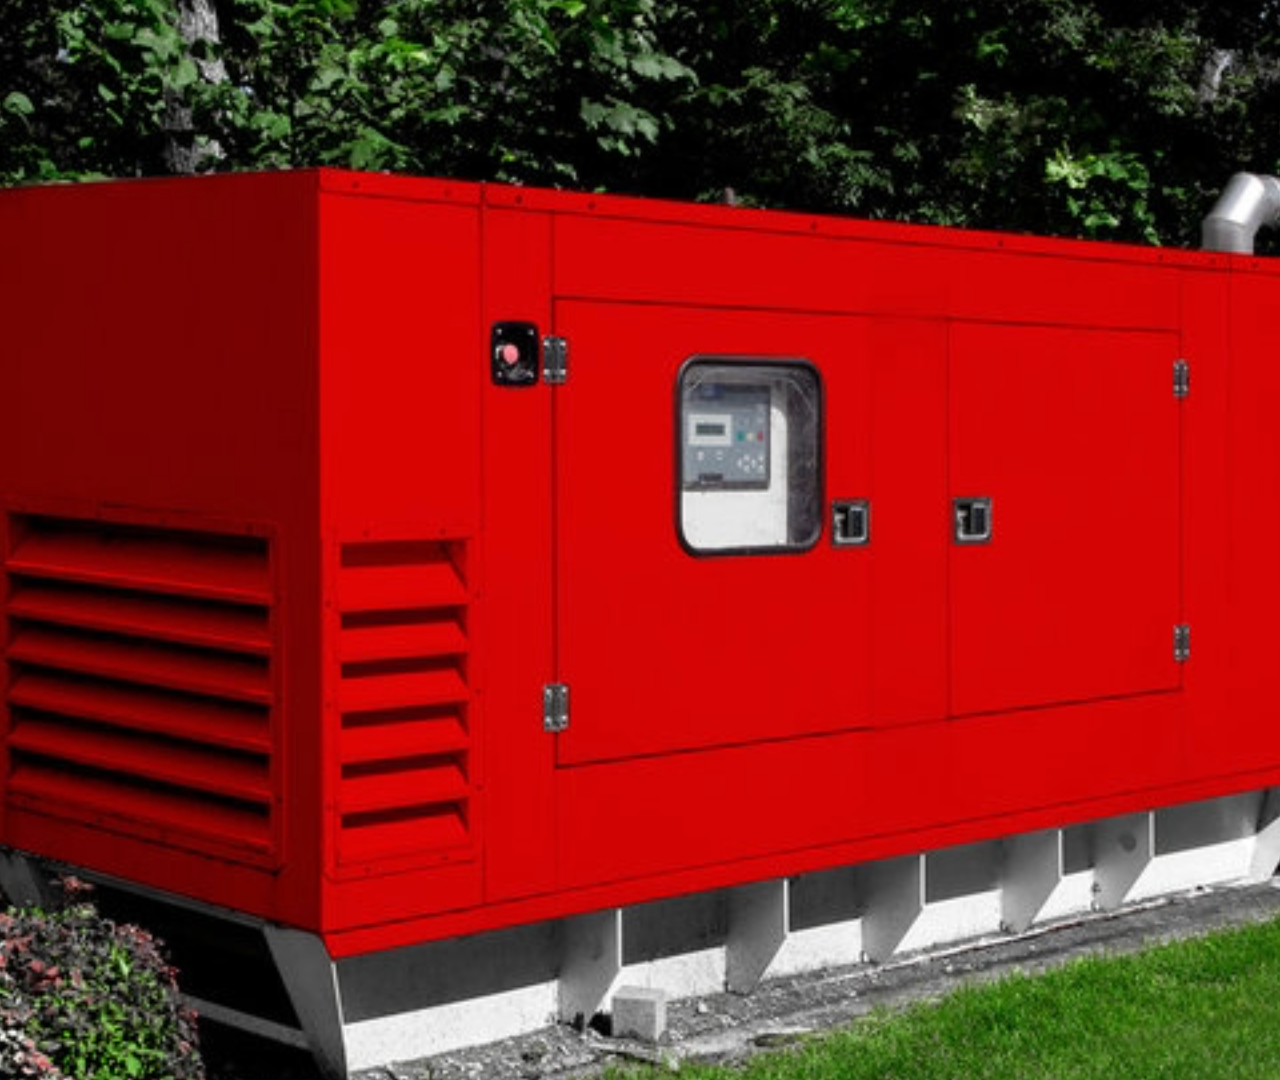 Portable Generators Tampa, Generator Set Up Tampa Bay, Power Outage Solutions Tampa, Tampa Bay Generator Consultants, Automatic Transfer Switches Tampa